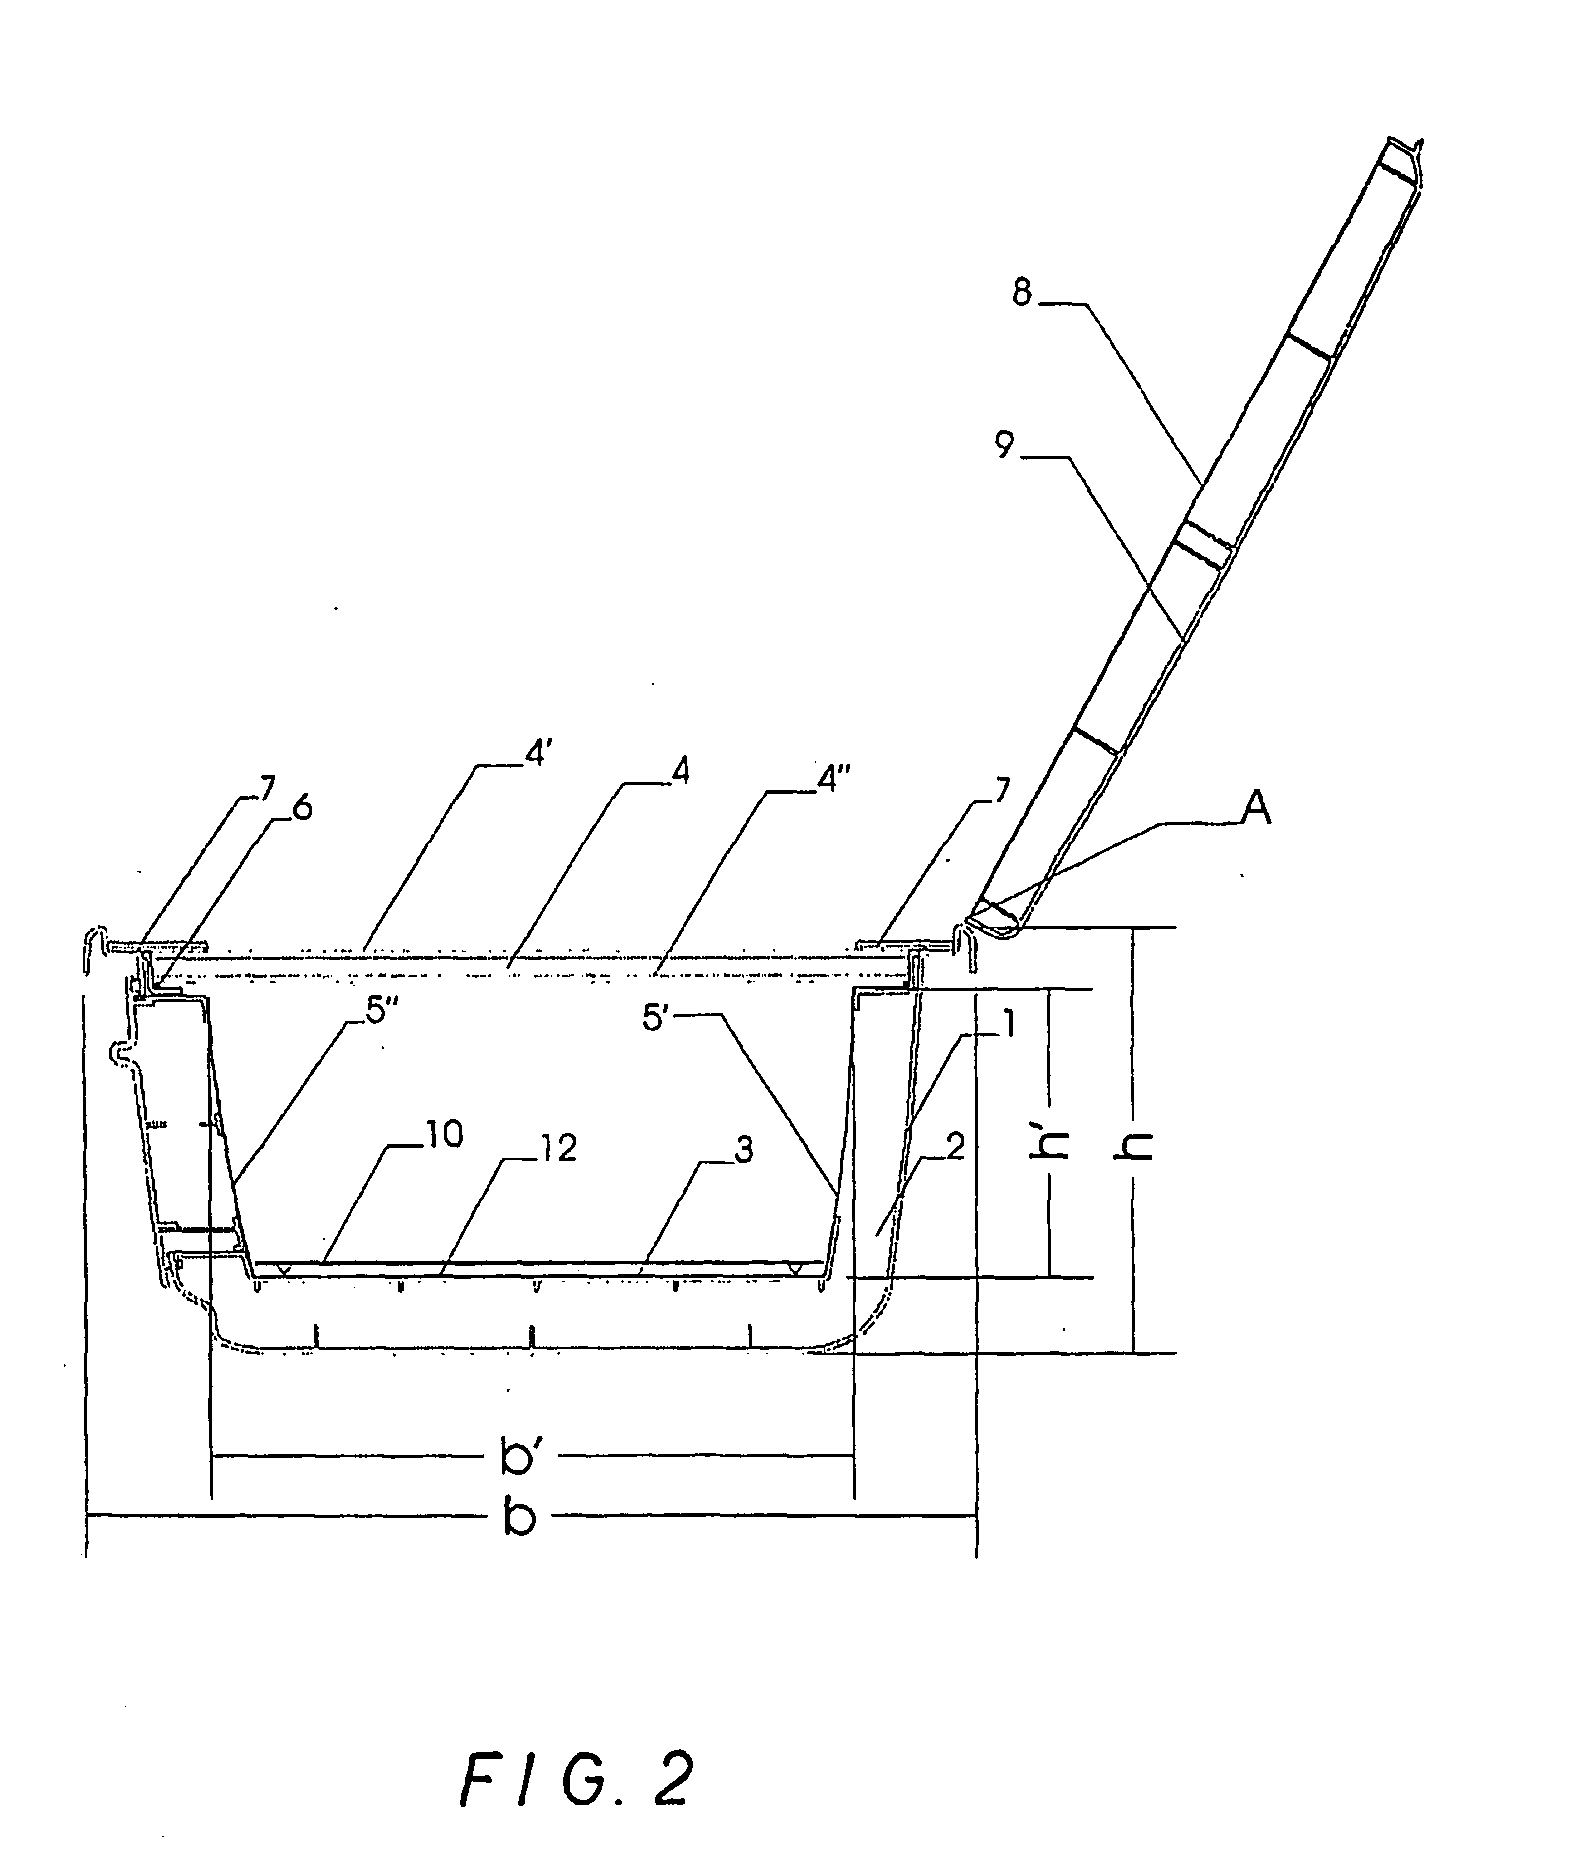 Solar cooker concentrator of the box type, using cpc-type optics